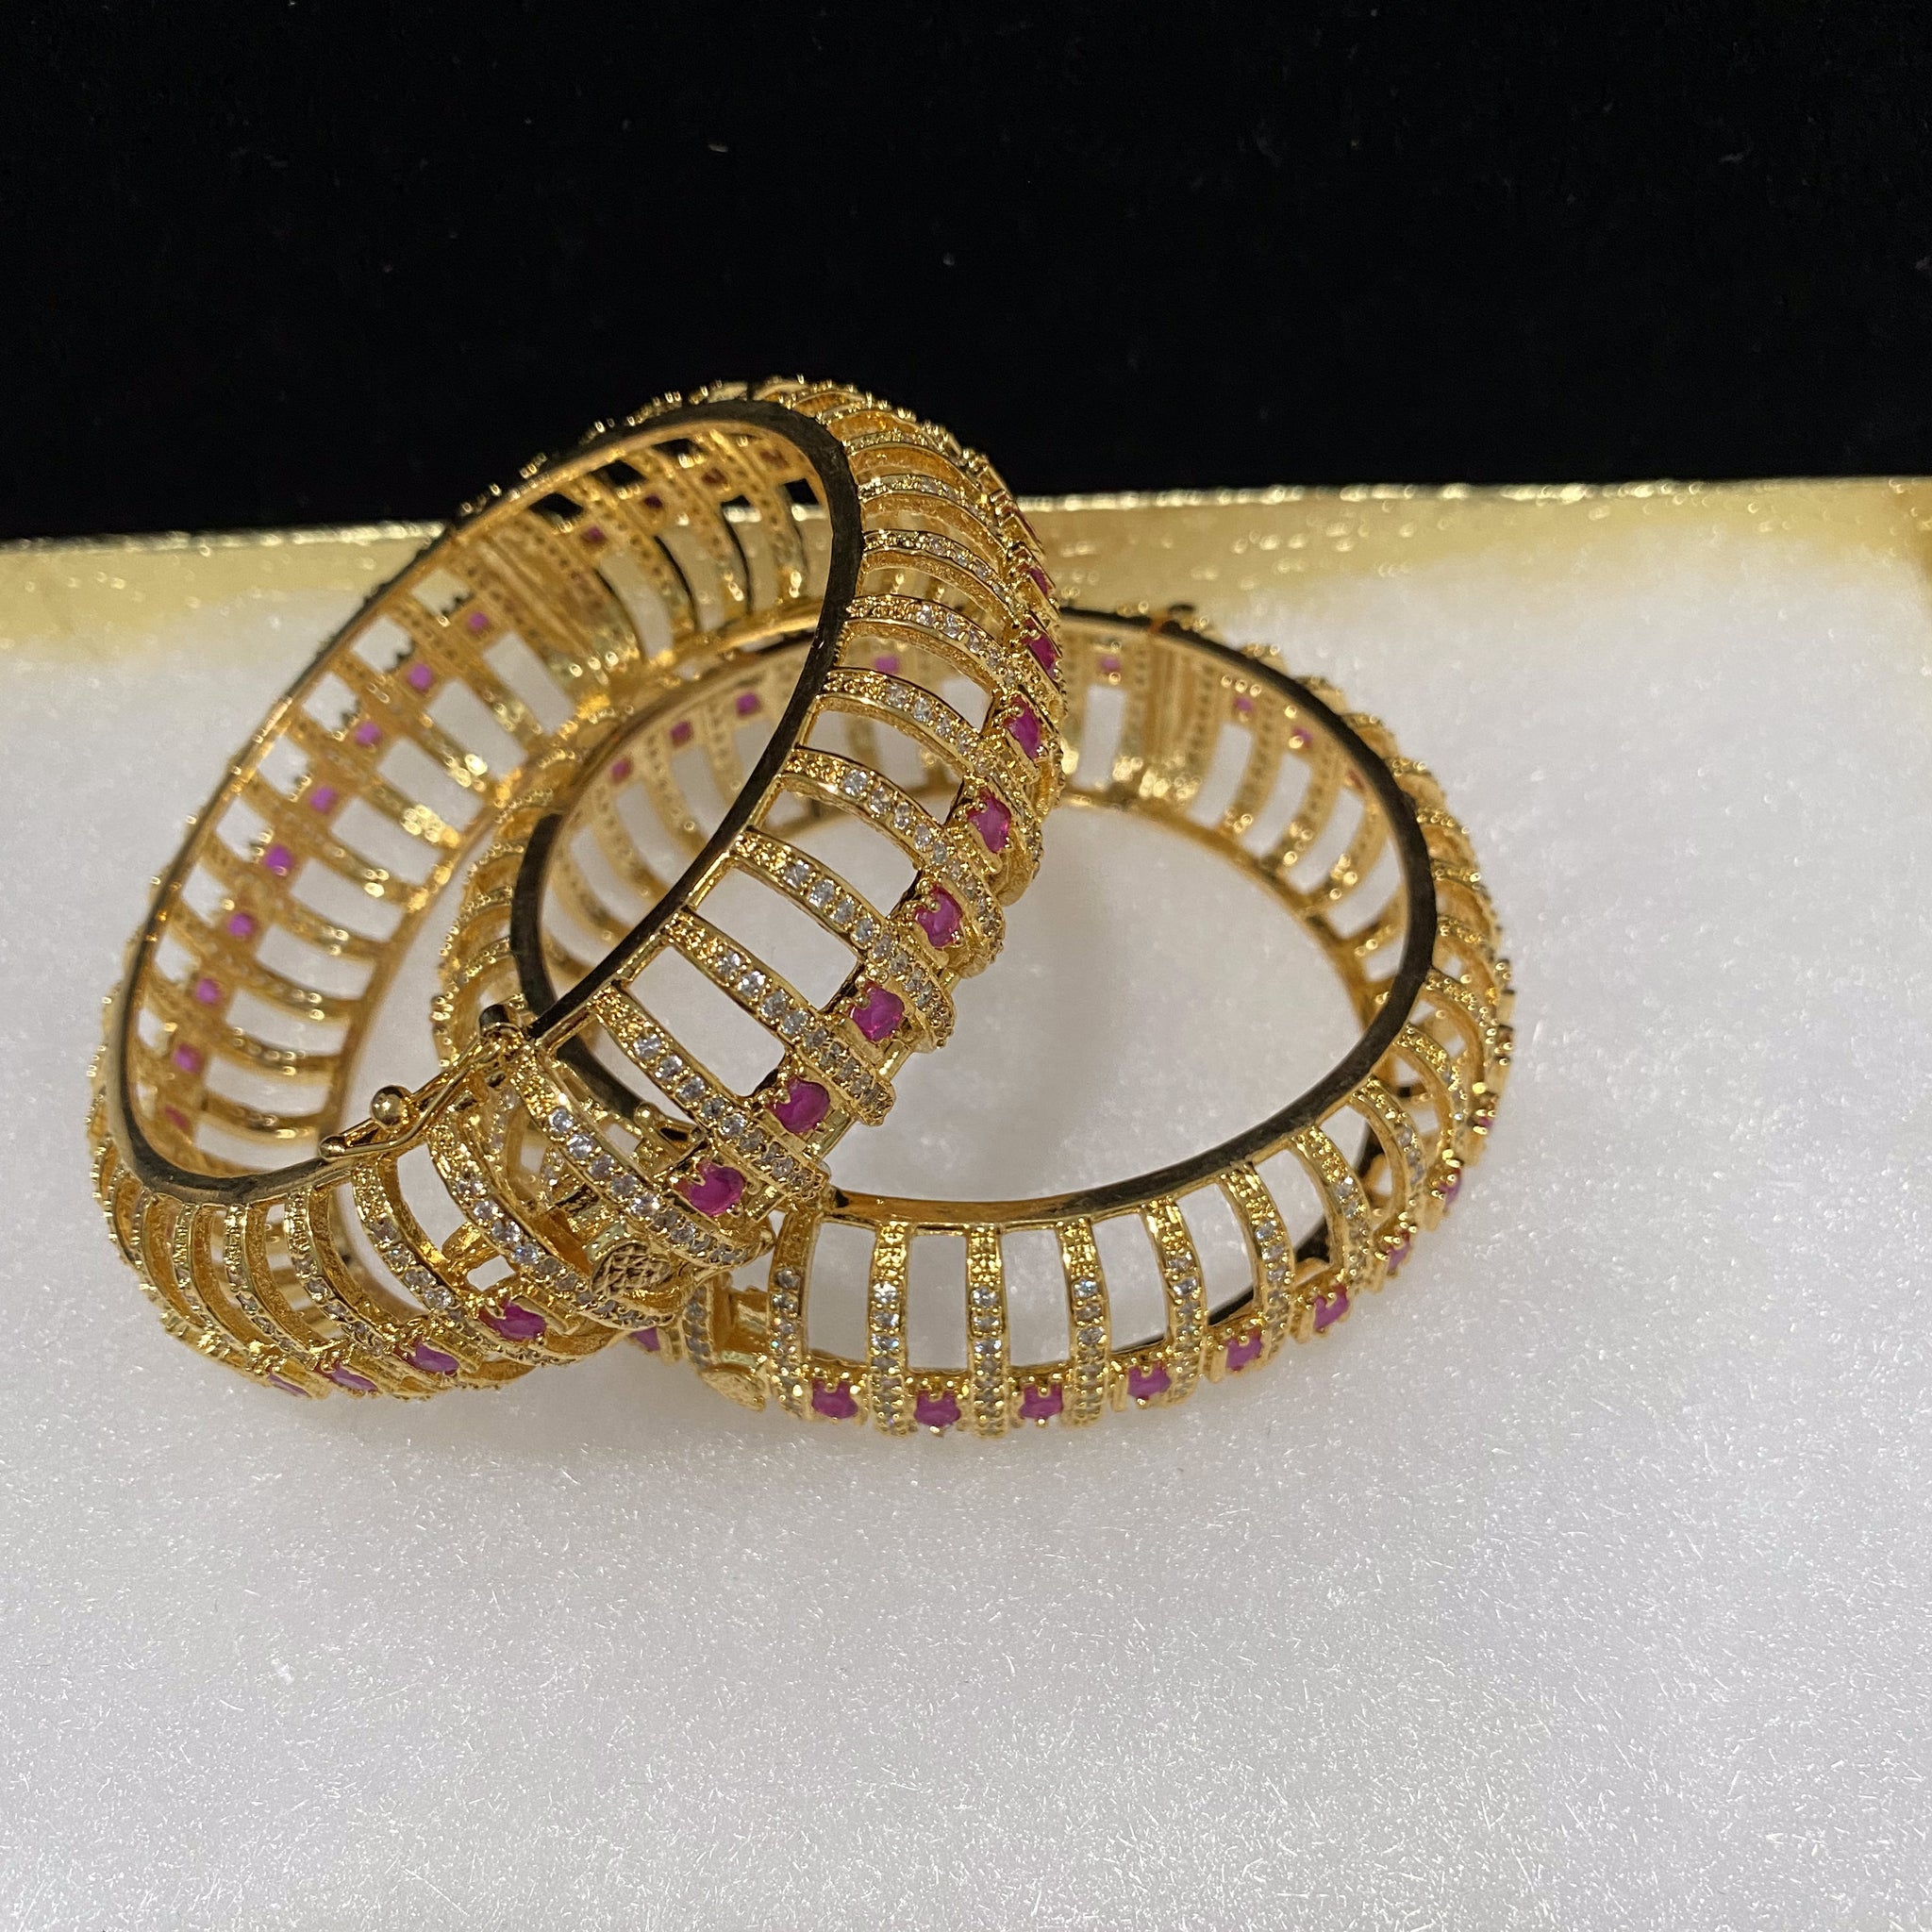  2g Gold Plated Ruby Red Bangles Size 2.8 Openable Evening Cocktail Imitation Jewelry Indian Wedding Bridal Necklace Set Bijoux